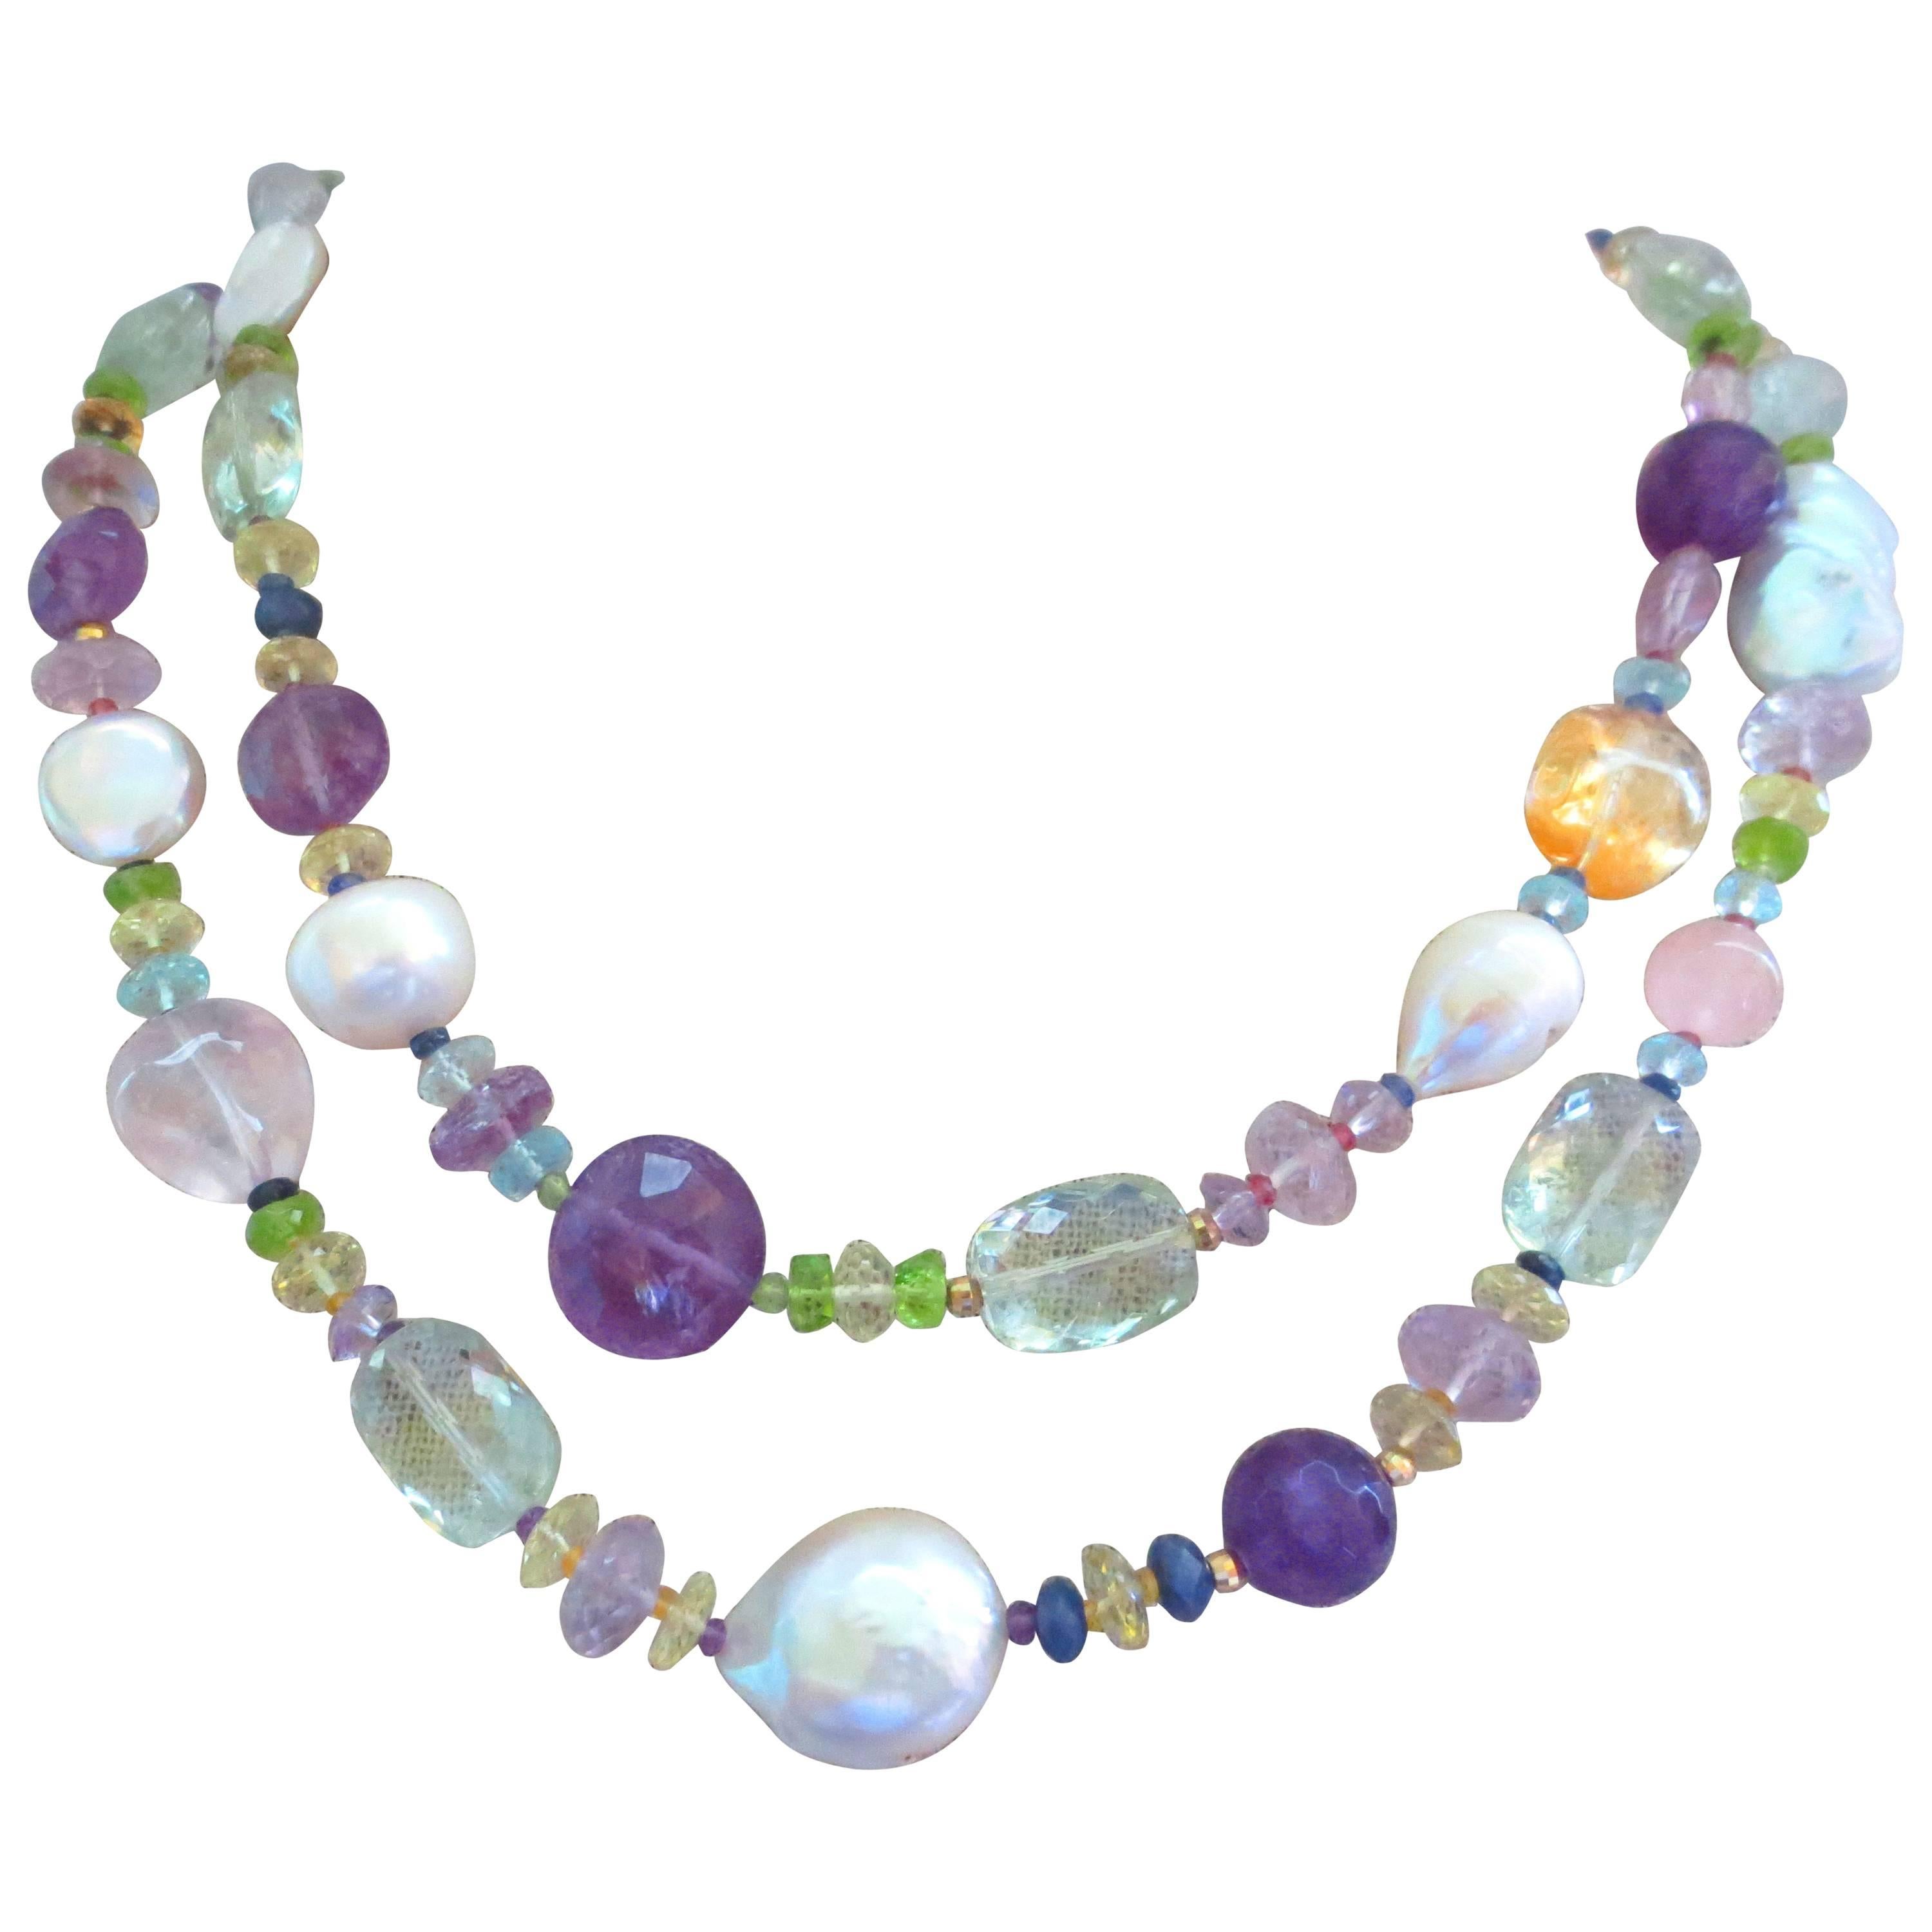 Amethyst, Citrine, Aquamarine, Peridot, Rose Quartz, Iolite, Baroque and coin  Pearls, Sapphire, and Garnet beads are combined to create a gorgeous shimmering piece. This stunning necklace can be worn long, or wrapped (with or without tassel) and is